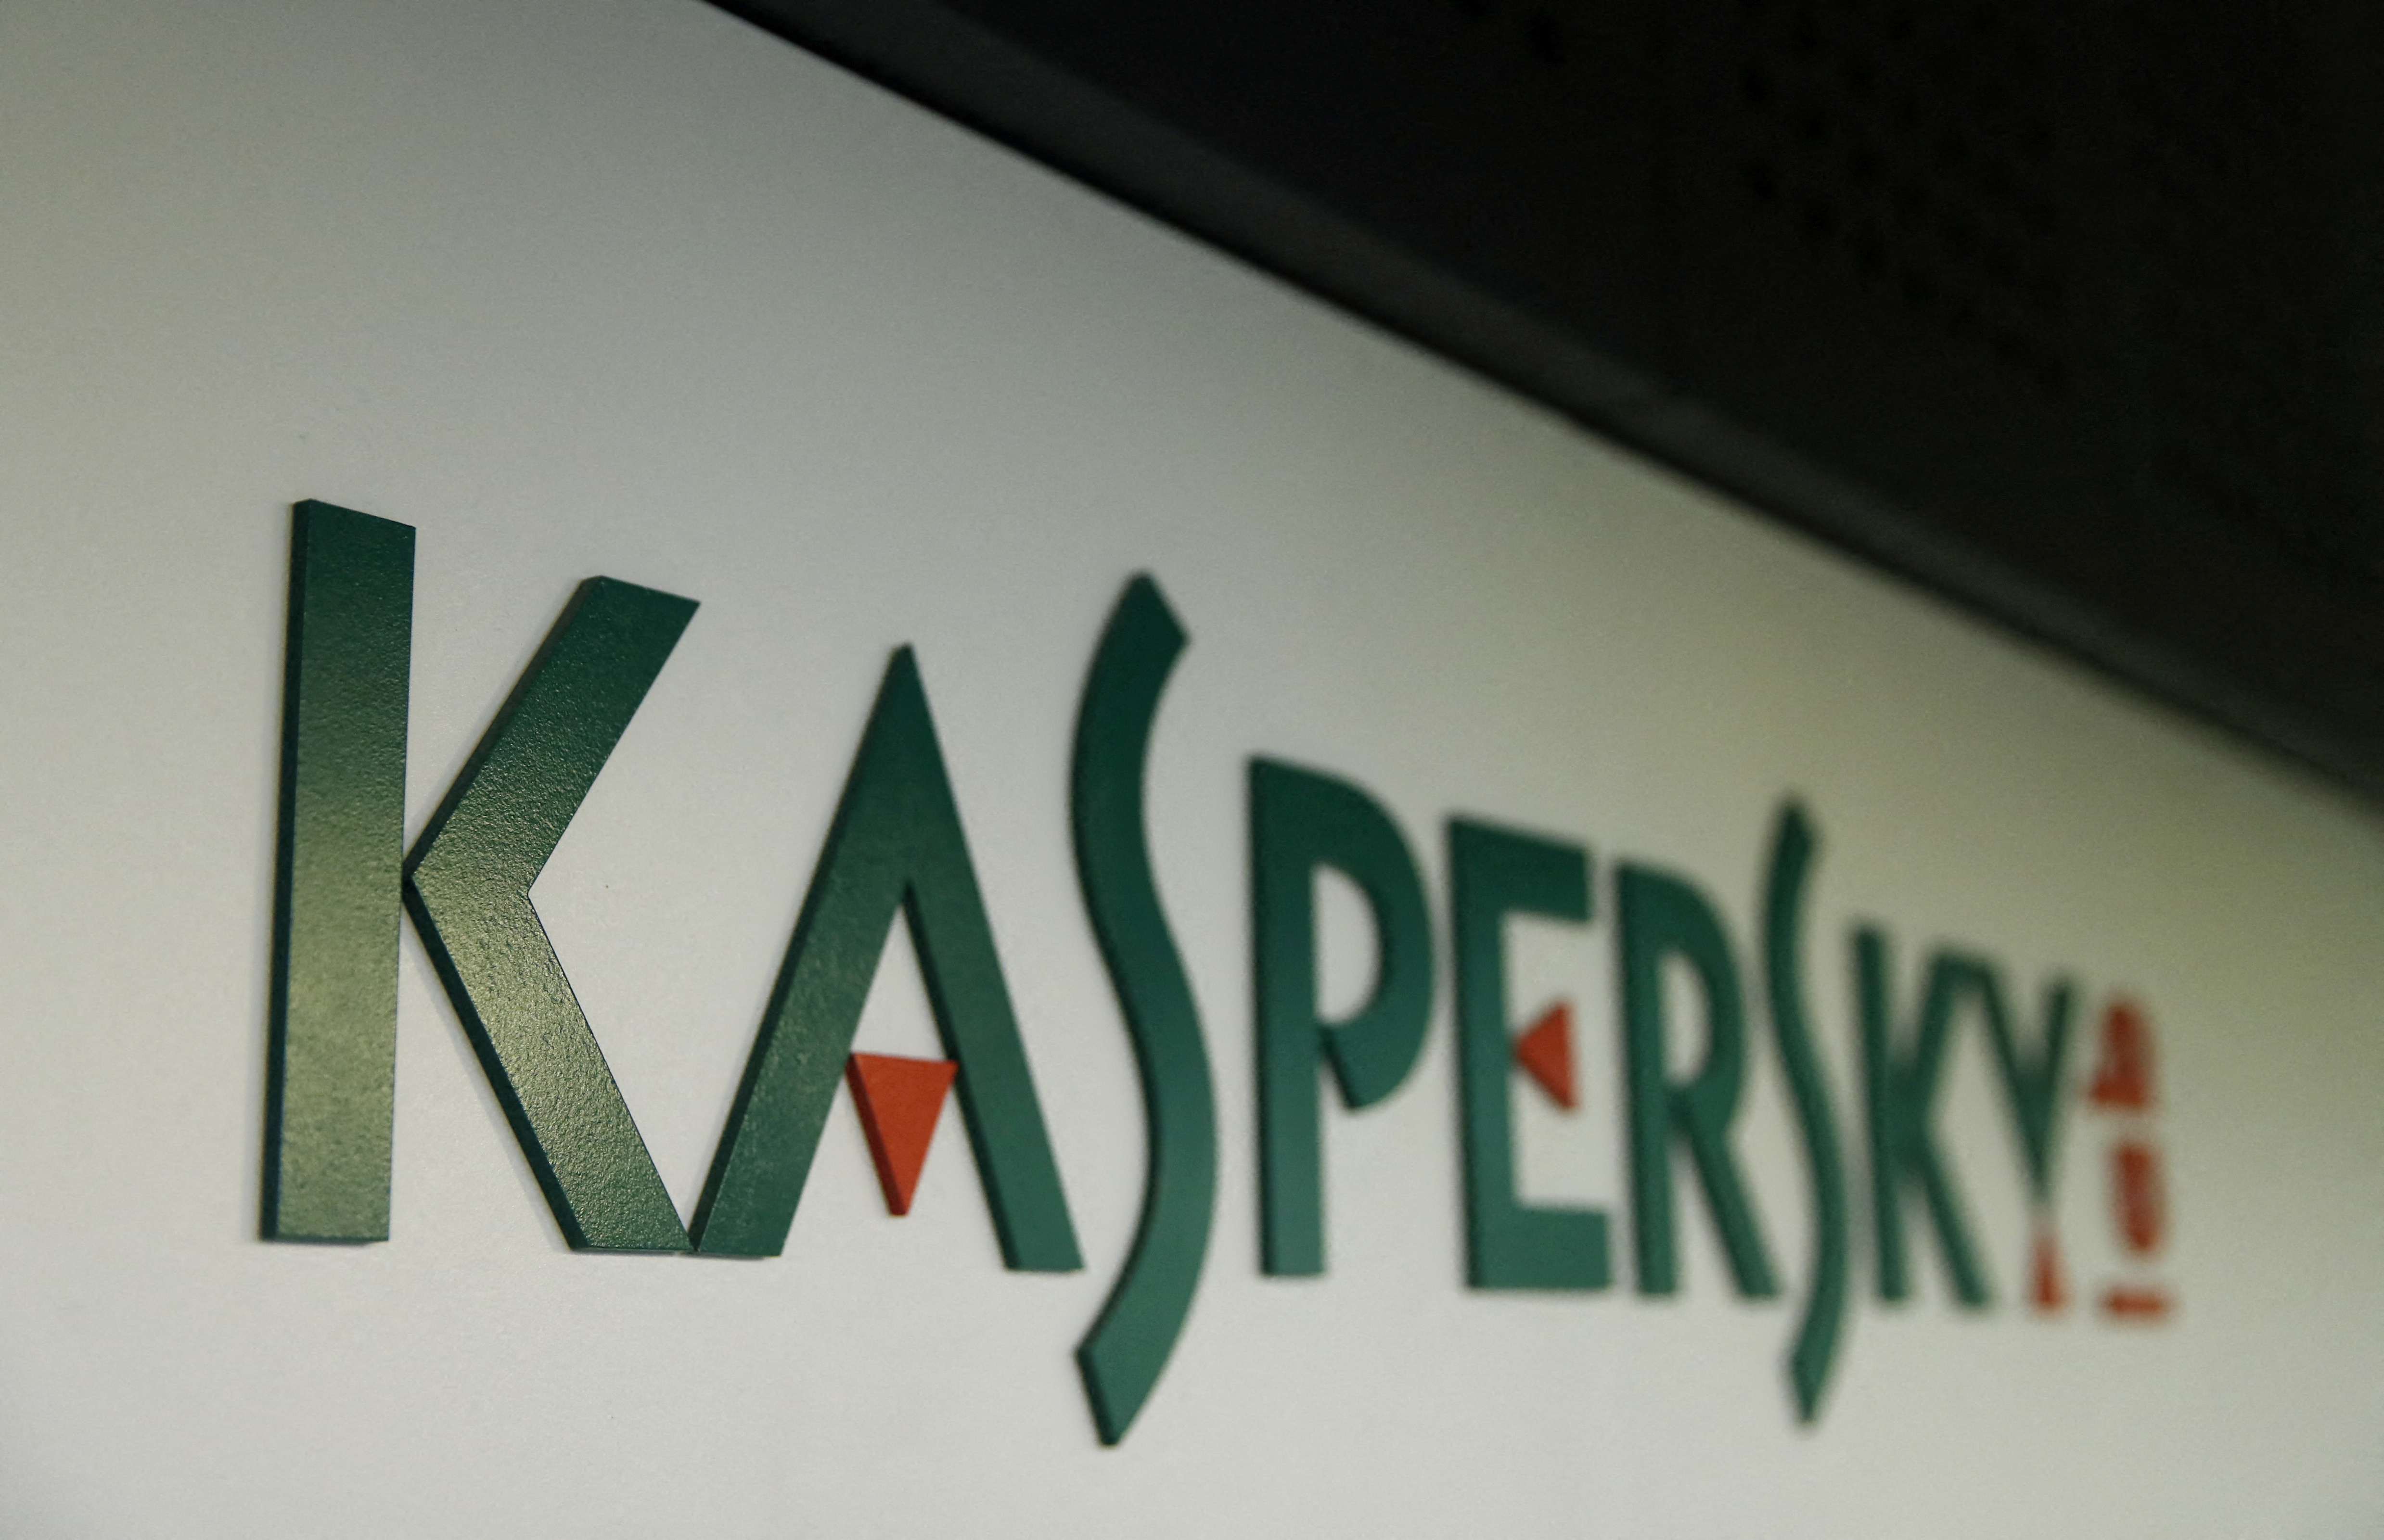 The logo of Russia's Kaspersky Lab is on displayat the company's office in Moscow